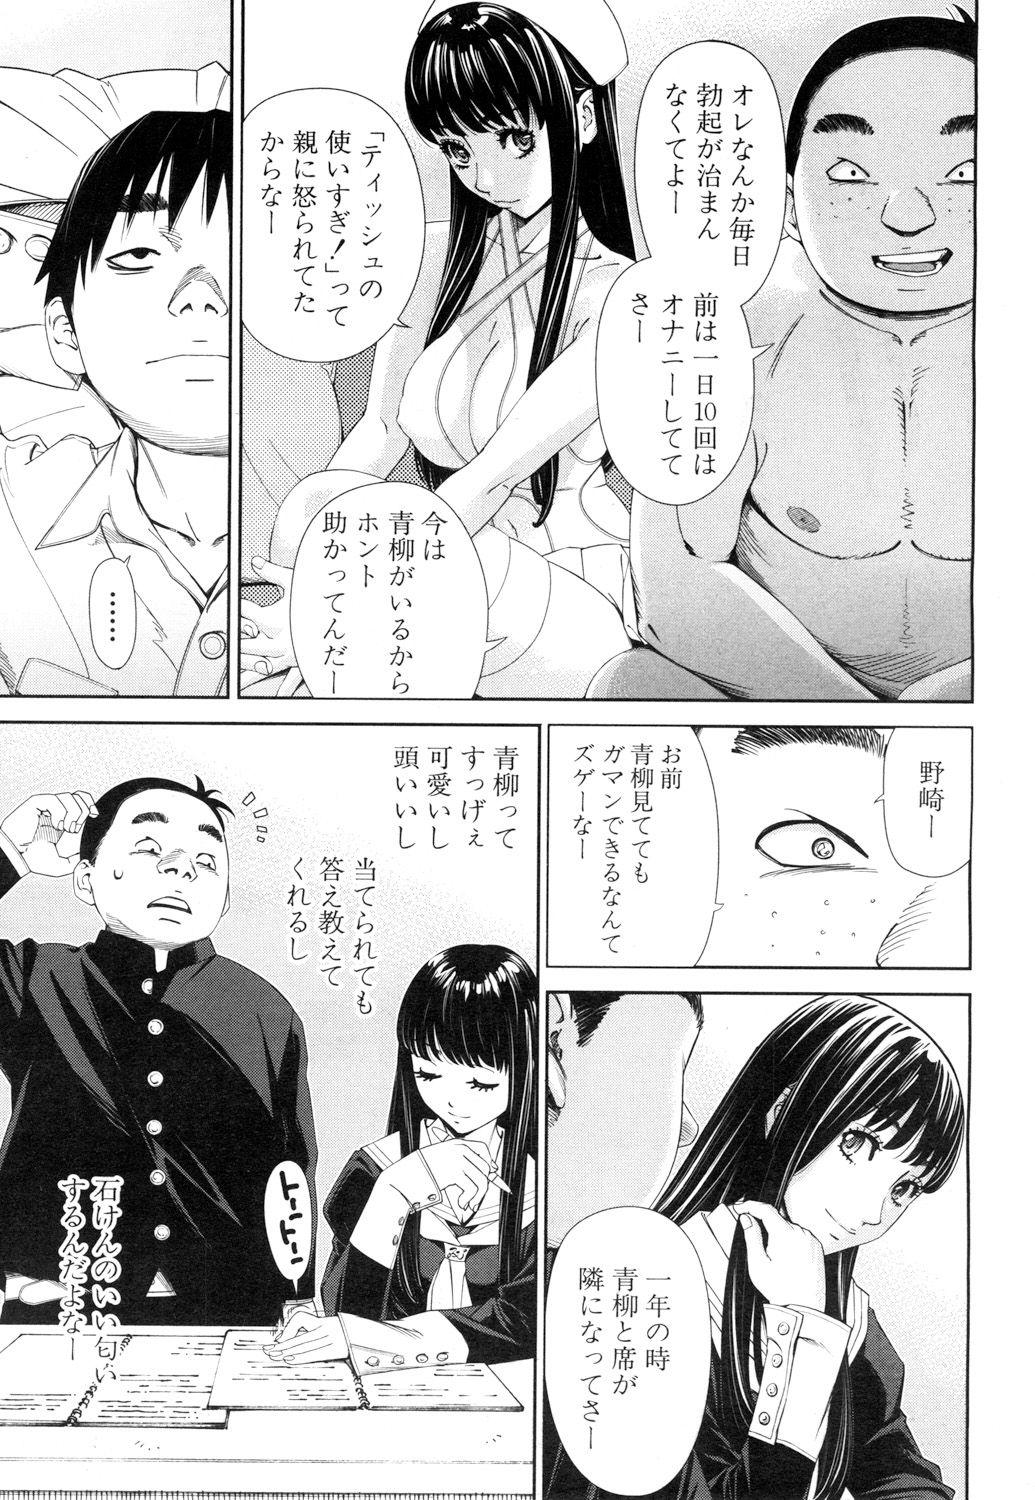 From COMIC Mugen Tensei 2018-11 Unshaved - Page 6